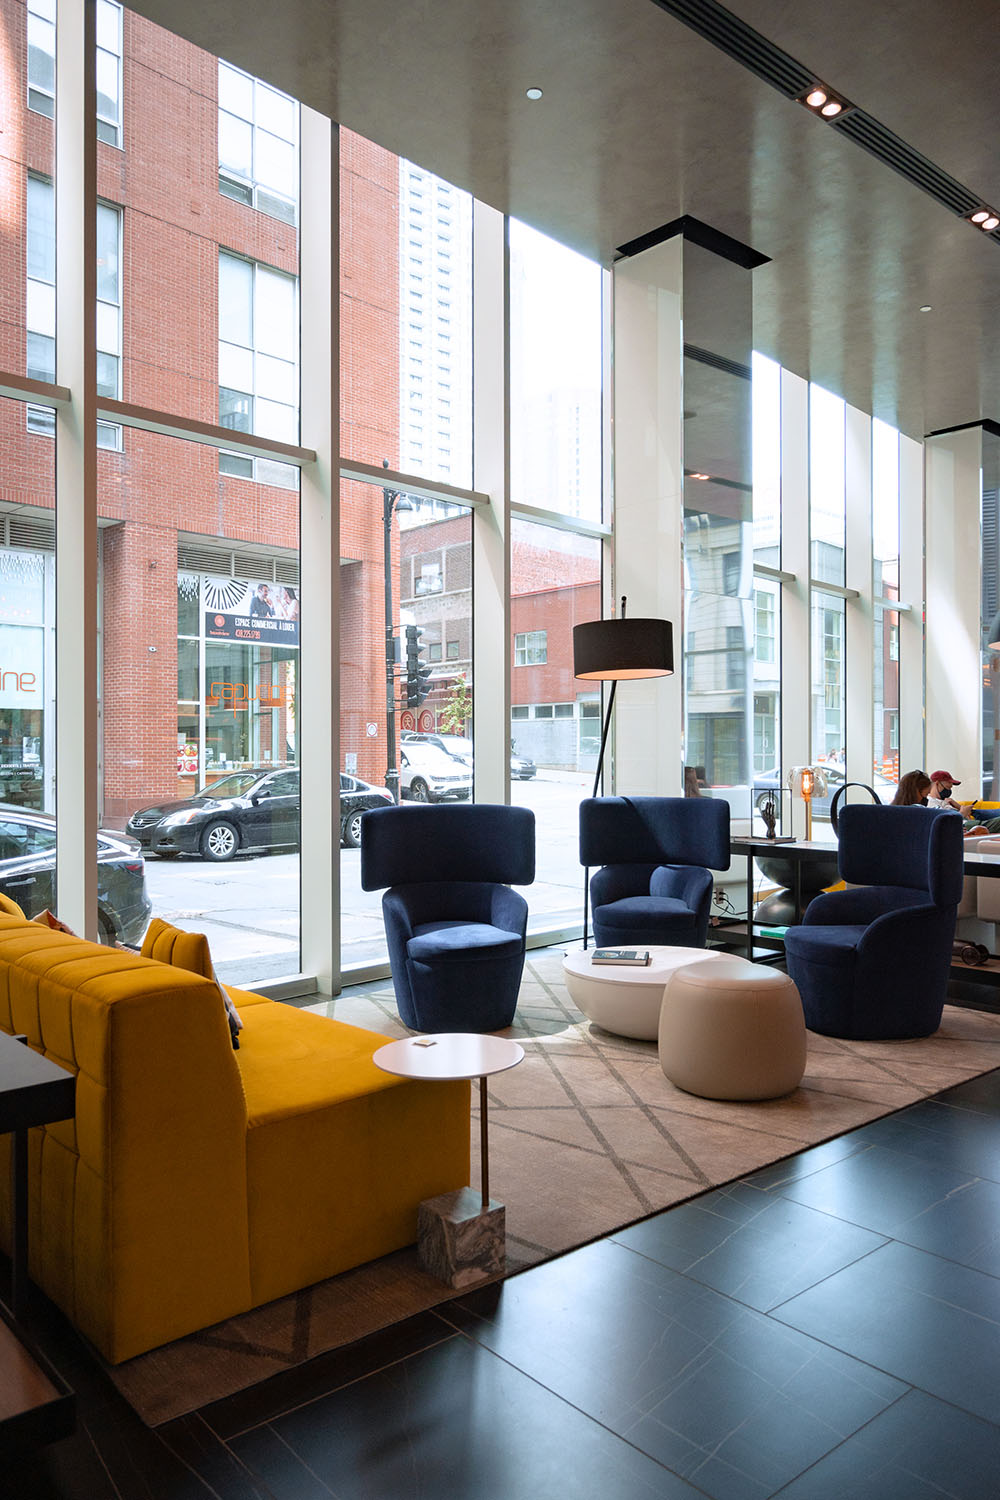 Planning a trip to Montreal soon? You'll definitely want to check out the brand new Humaniti Hotel Montreal! Located in the heart of downtown, this hotel is a true oasis in the city. Read on to find out why I loved it so much, and why you'll definitely want to book your next overnight stay in Montreal here! Pictured here: The lobby